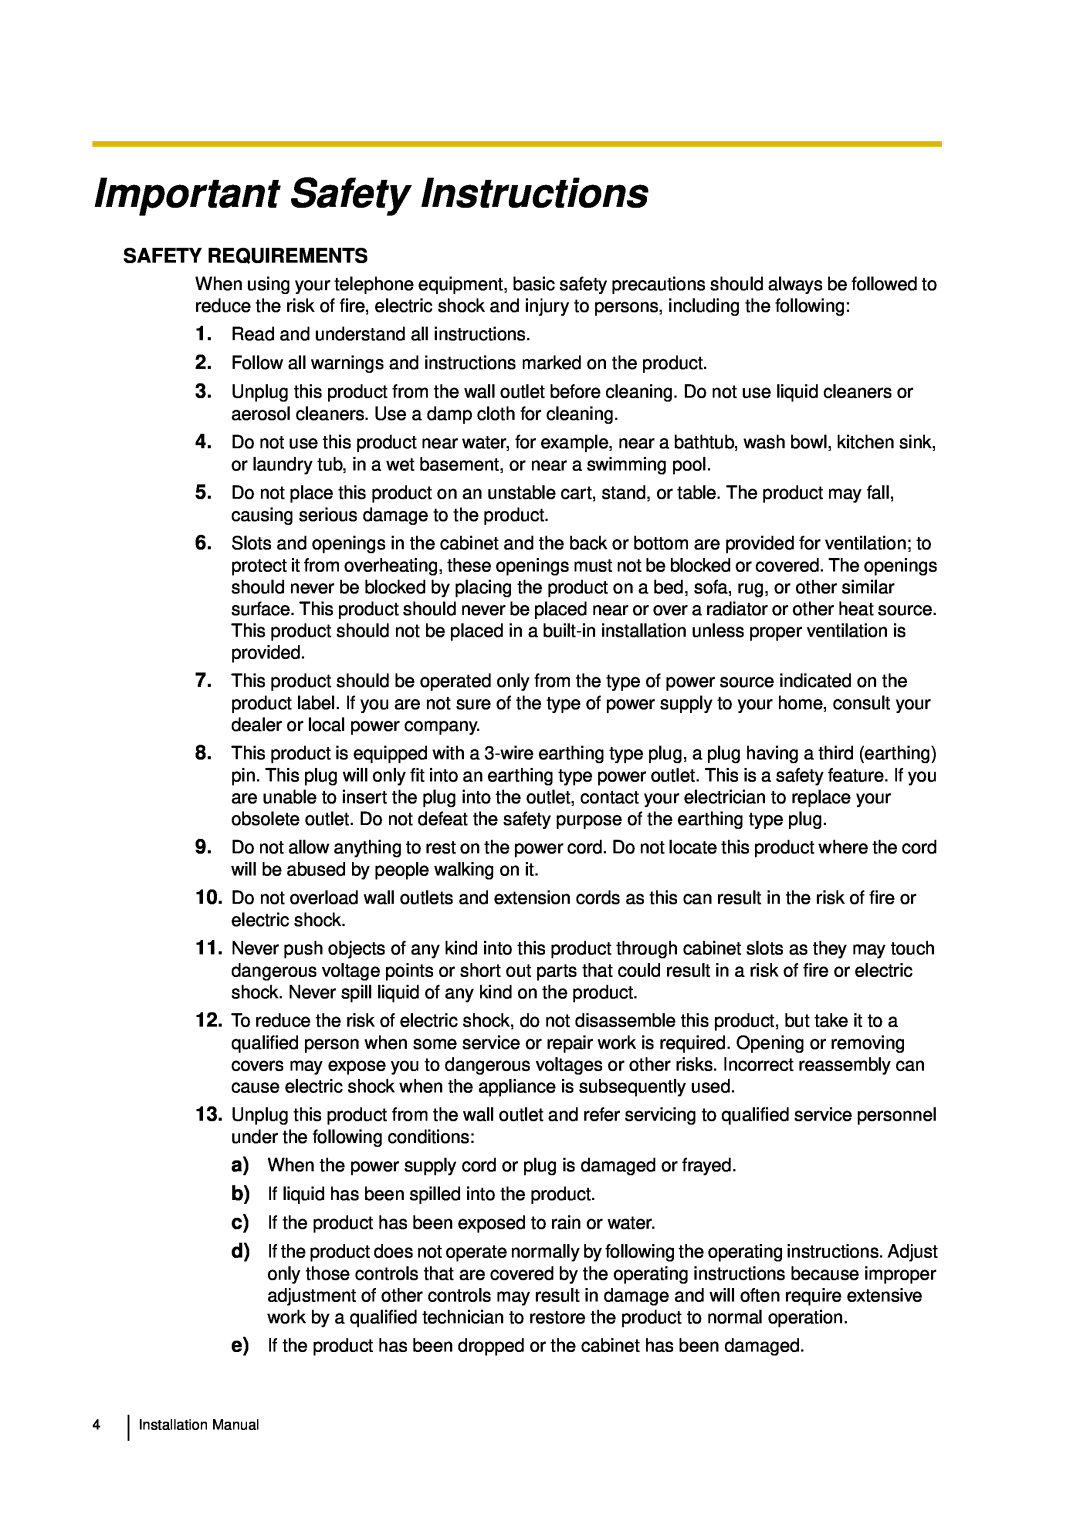 Panasonic KX-TDA30 installation manual Important Safety Instructions, Safety Requirements 